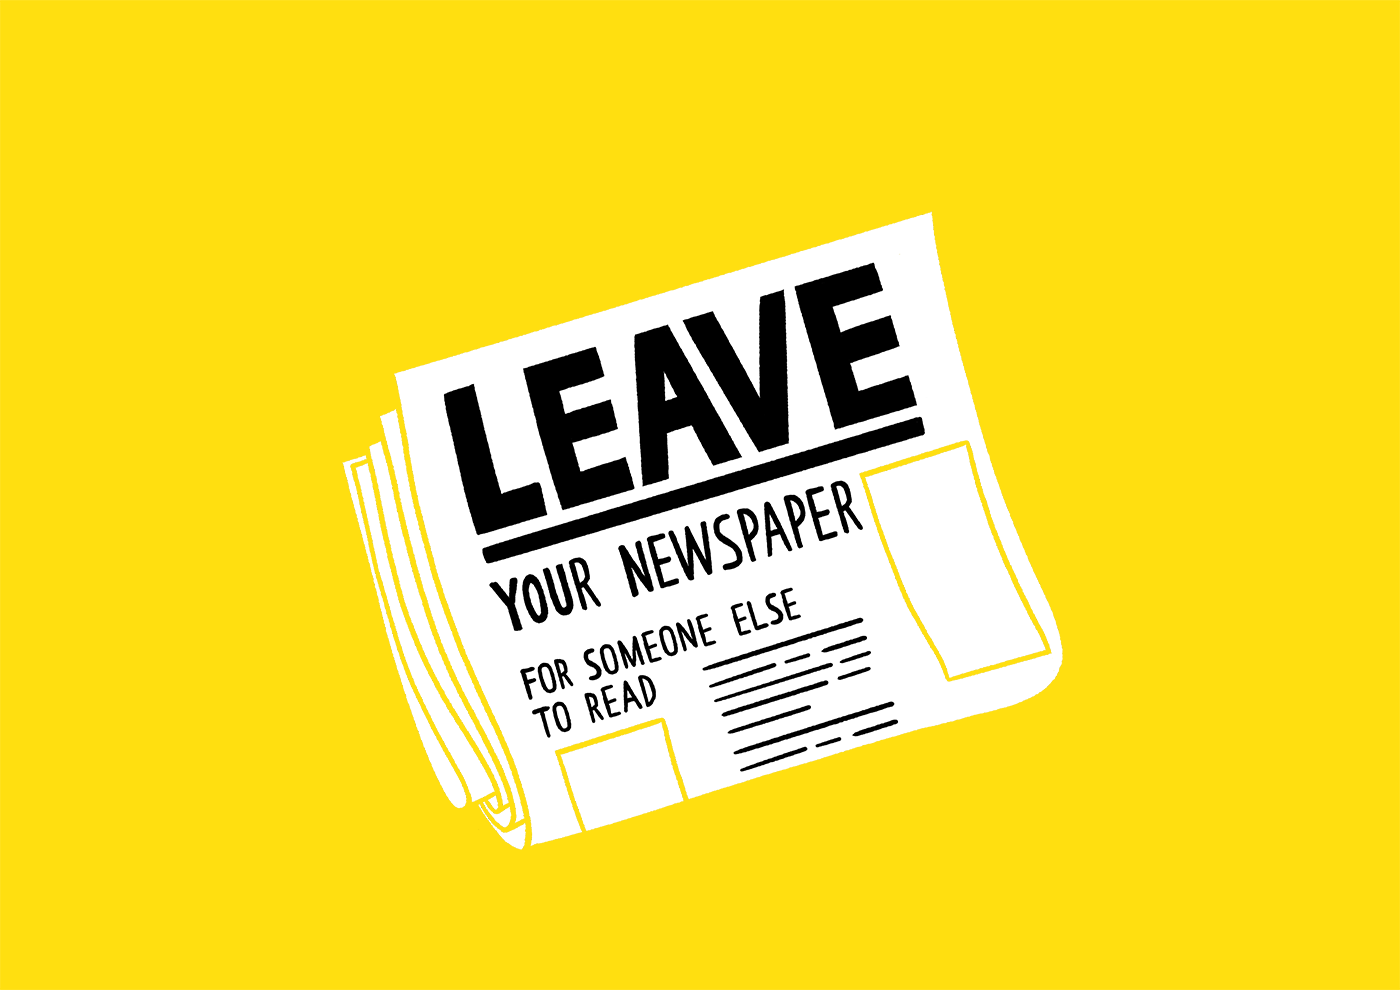 Leave your newspaper for someone else